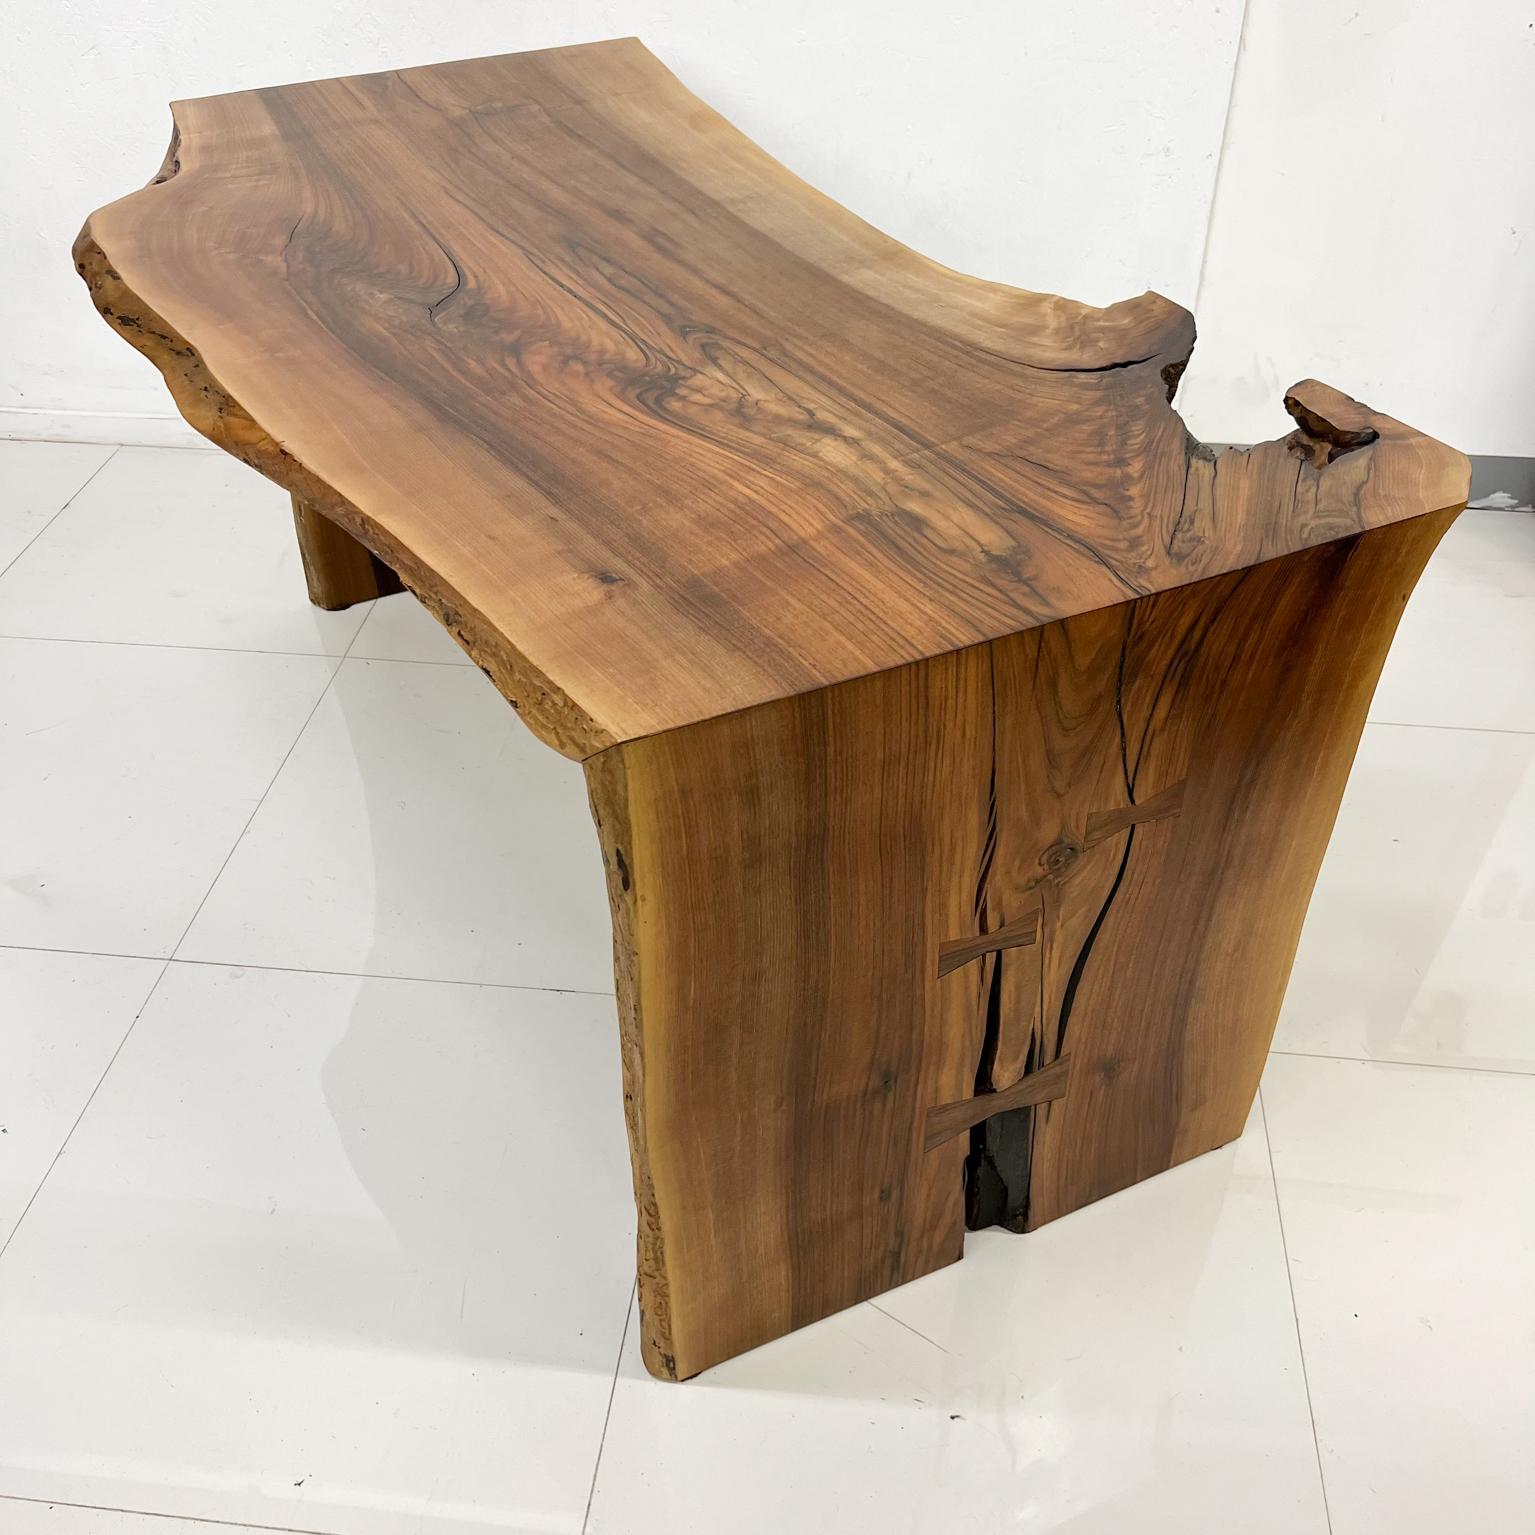 1970s Live Edge Walnut Waterfall Desk Inspiration George Nakashima In Good Condition For Sale In Chula Vista, CA